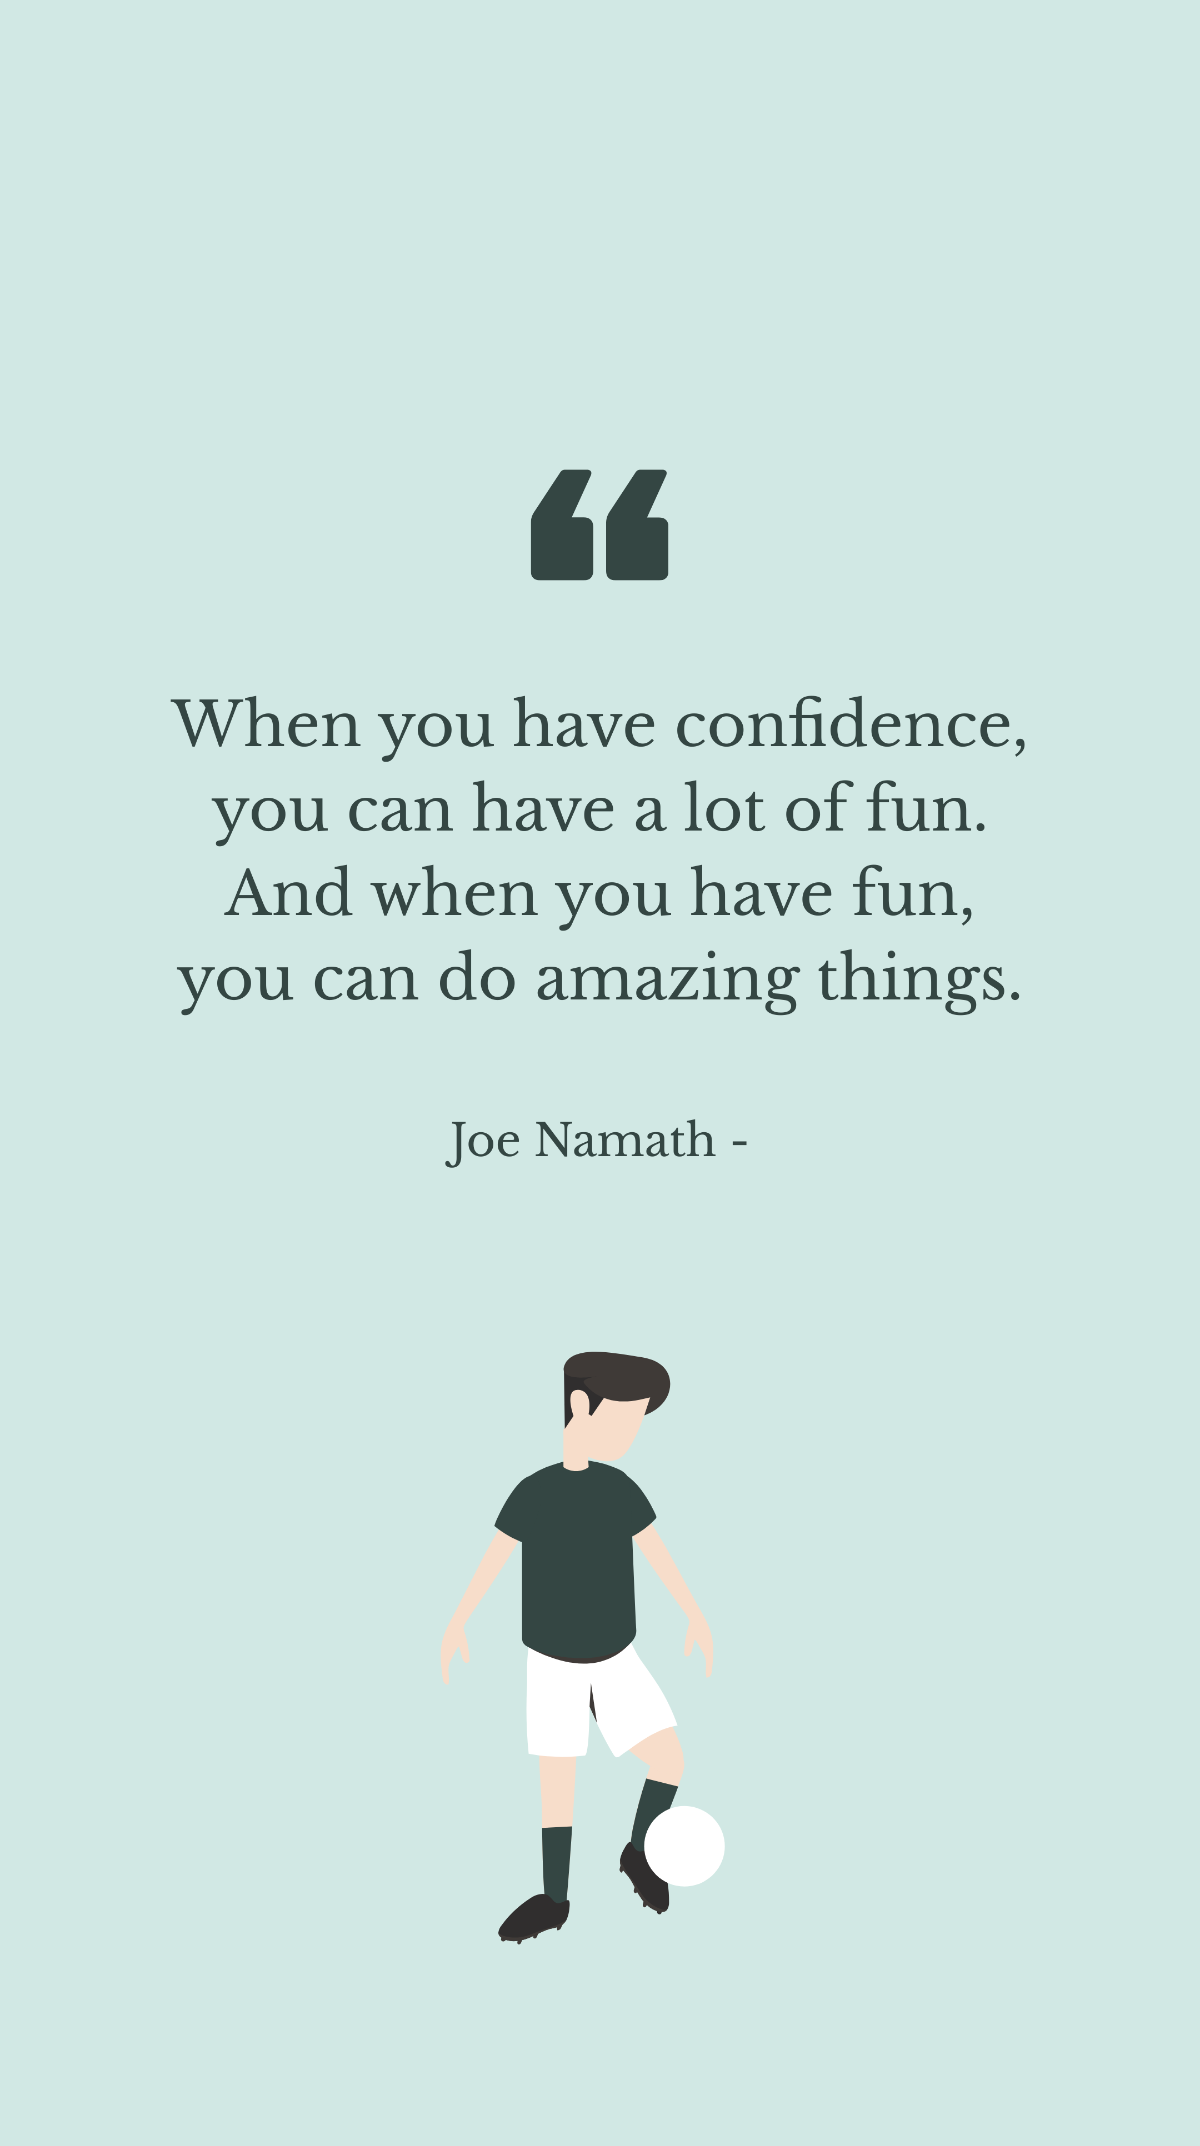 Free Joe Namath - When you have confidence, you can have a lot of fun. And when you have fun, you can do amazing things. Template